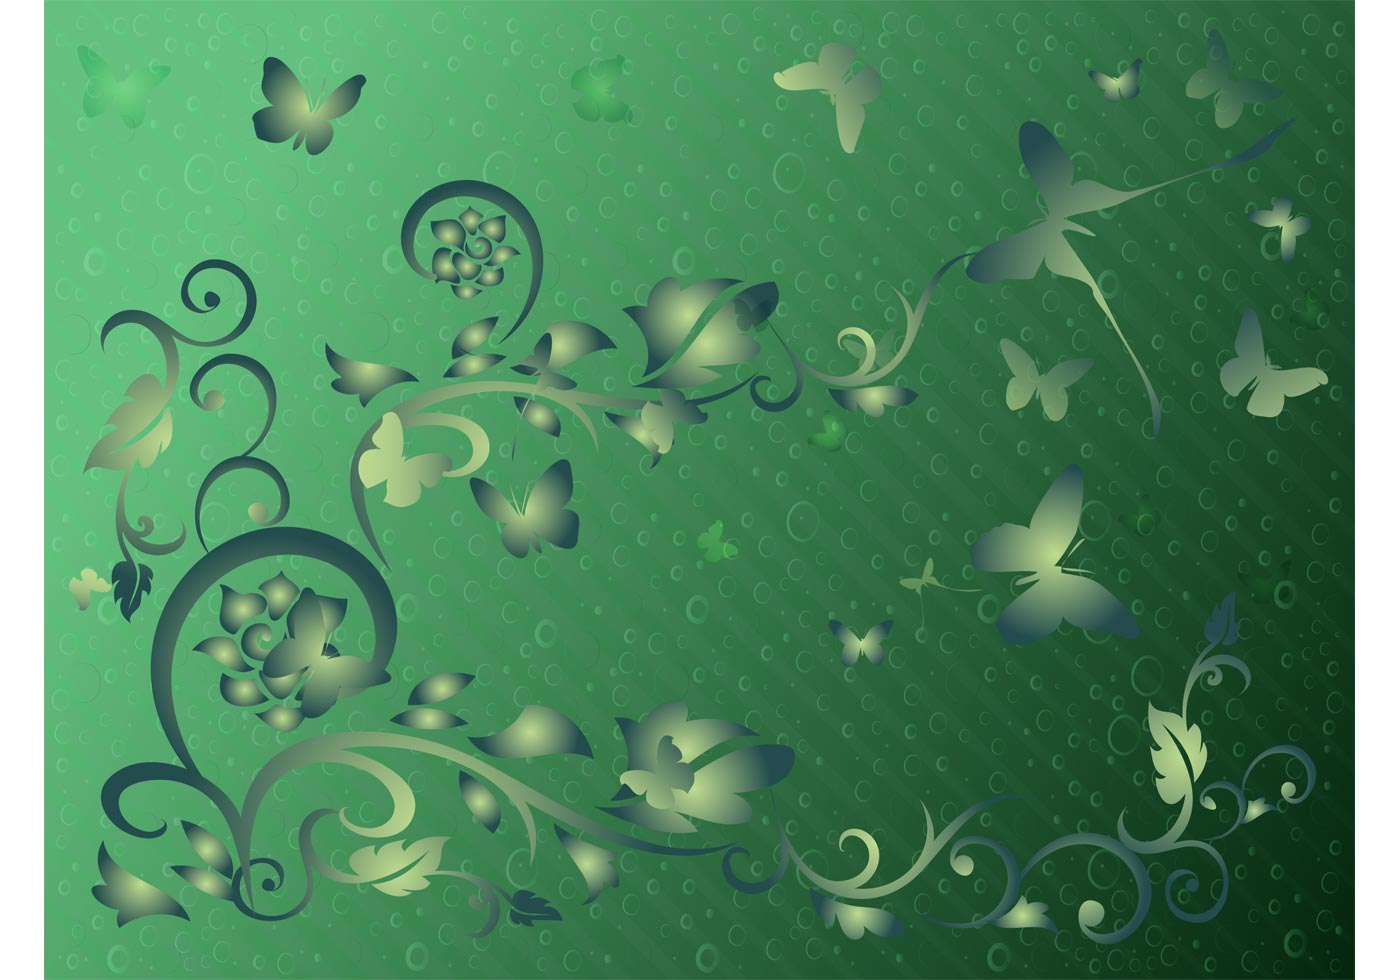 Download Butterfly Border Free Vector Art - (3765 Free Downloads)